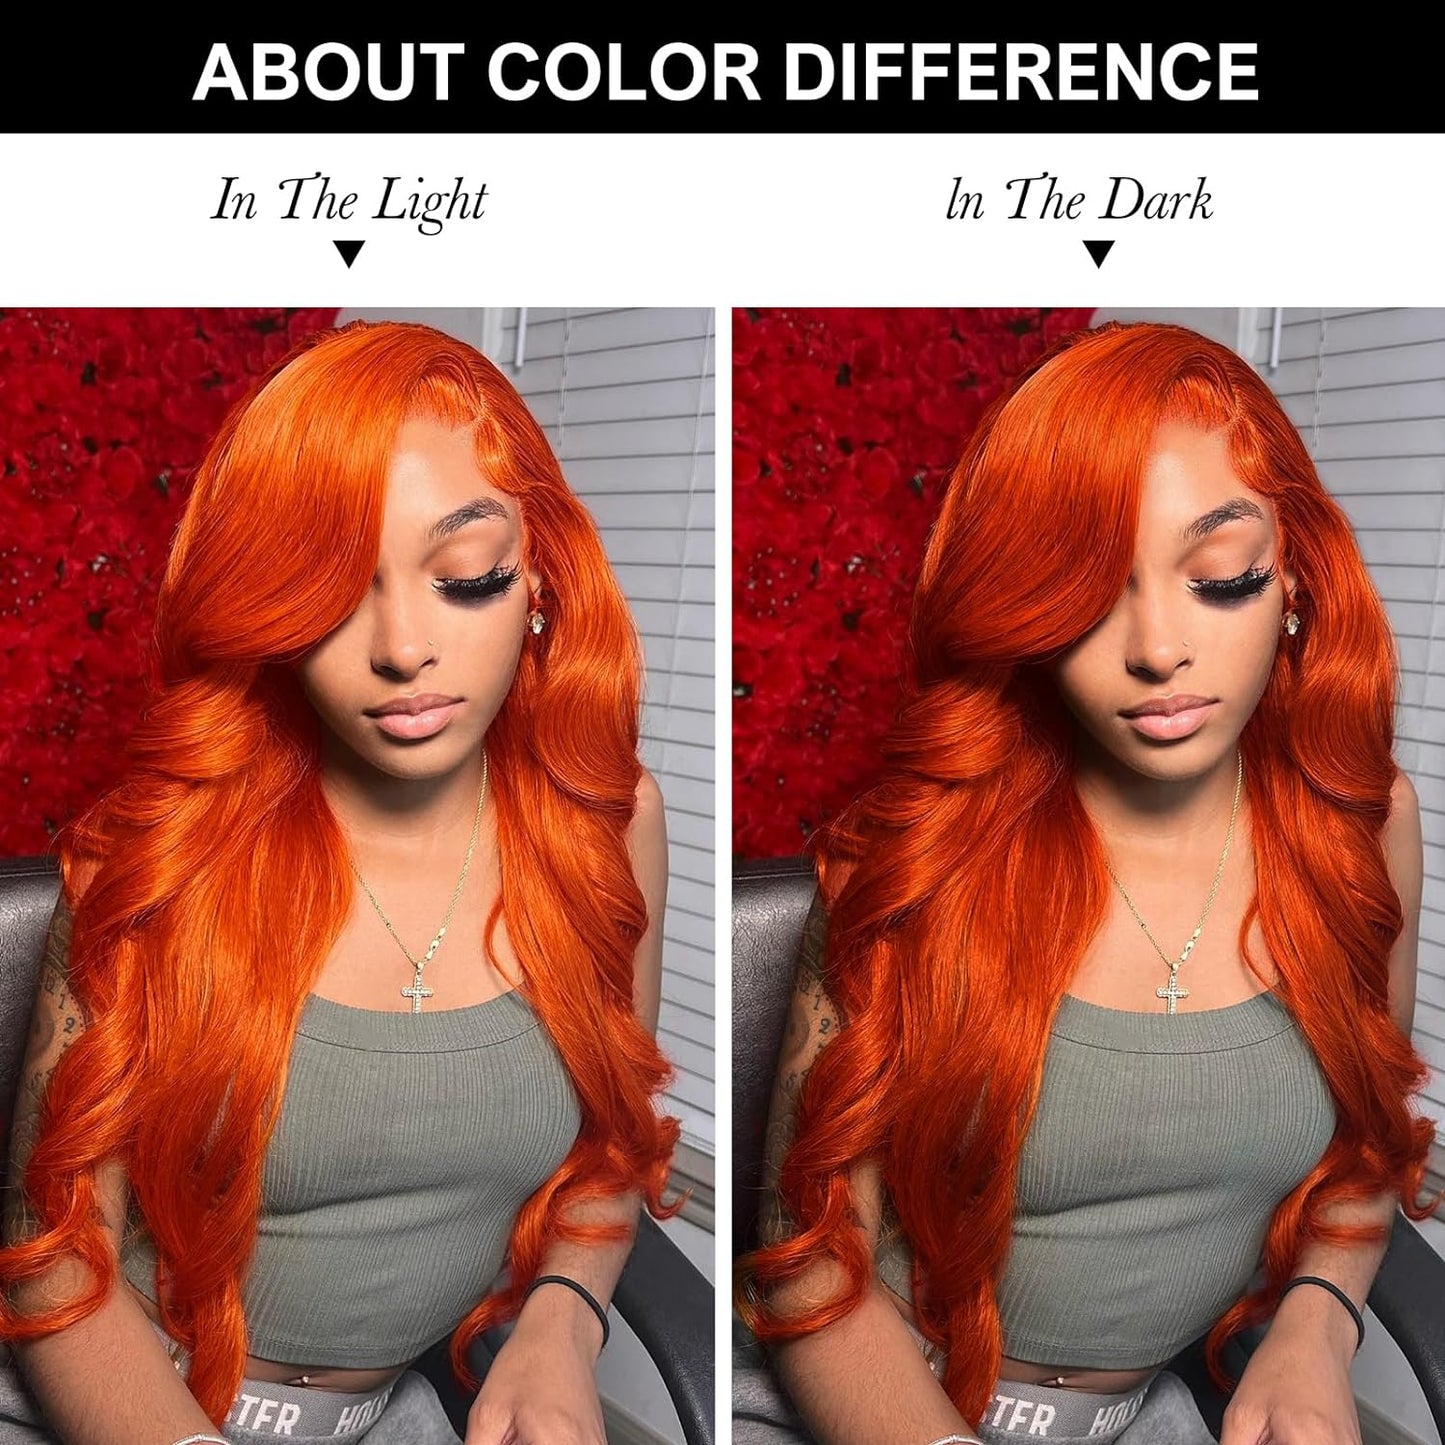 13x6 Ginger Lace Front Wigs Human Hair Orange 13x6 Lace Front Wigs Human Hair Pre Plucked,Body Wave Frontal Wigs Human Hair Hd Lace, Glueless Lace Front Wigs Human Hair Colored With Baby Hair